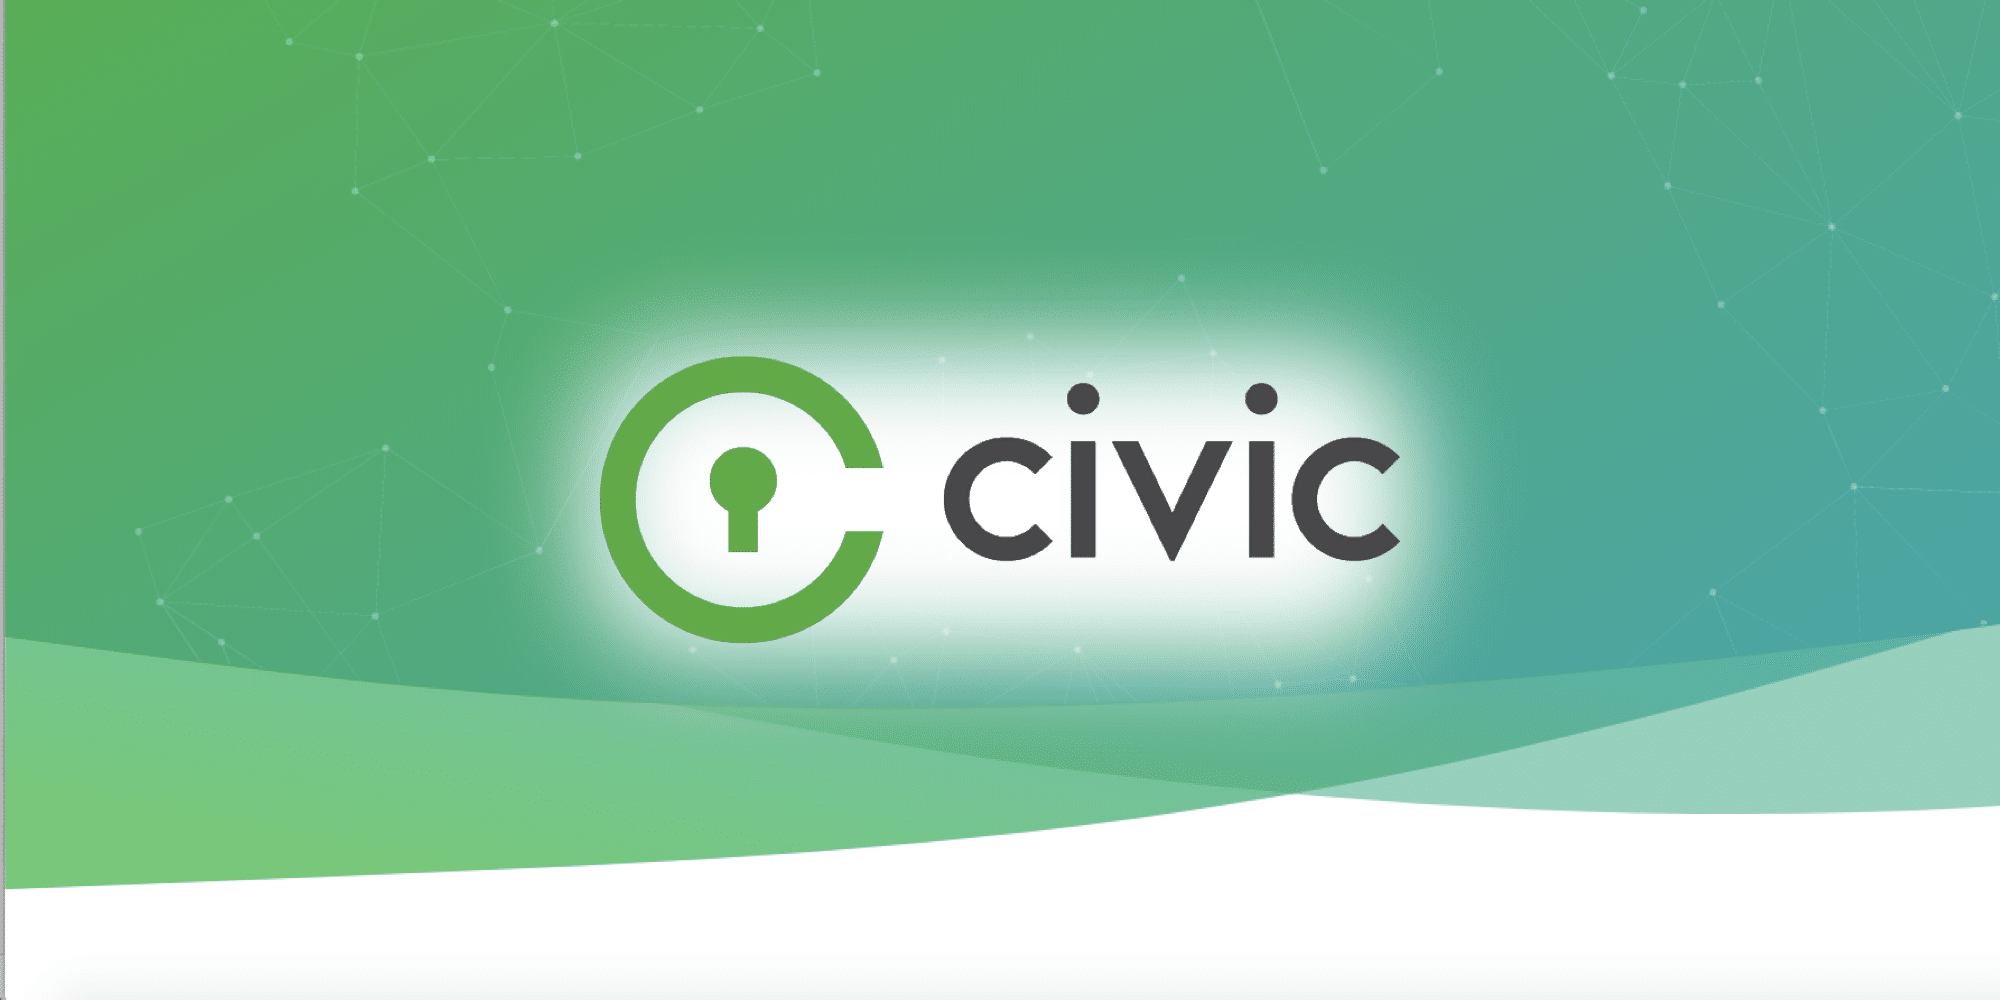 Civcc cryptocurrency bitcoin potential 2018